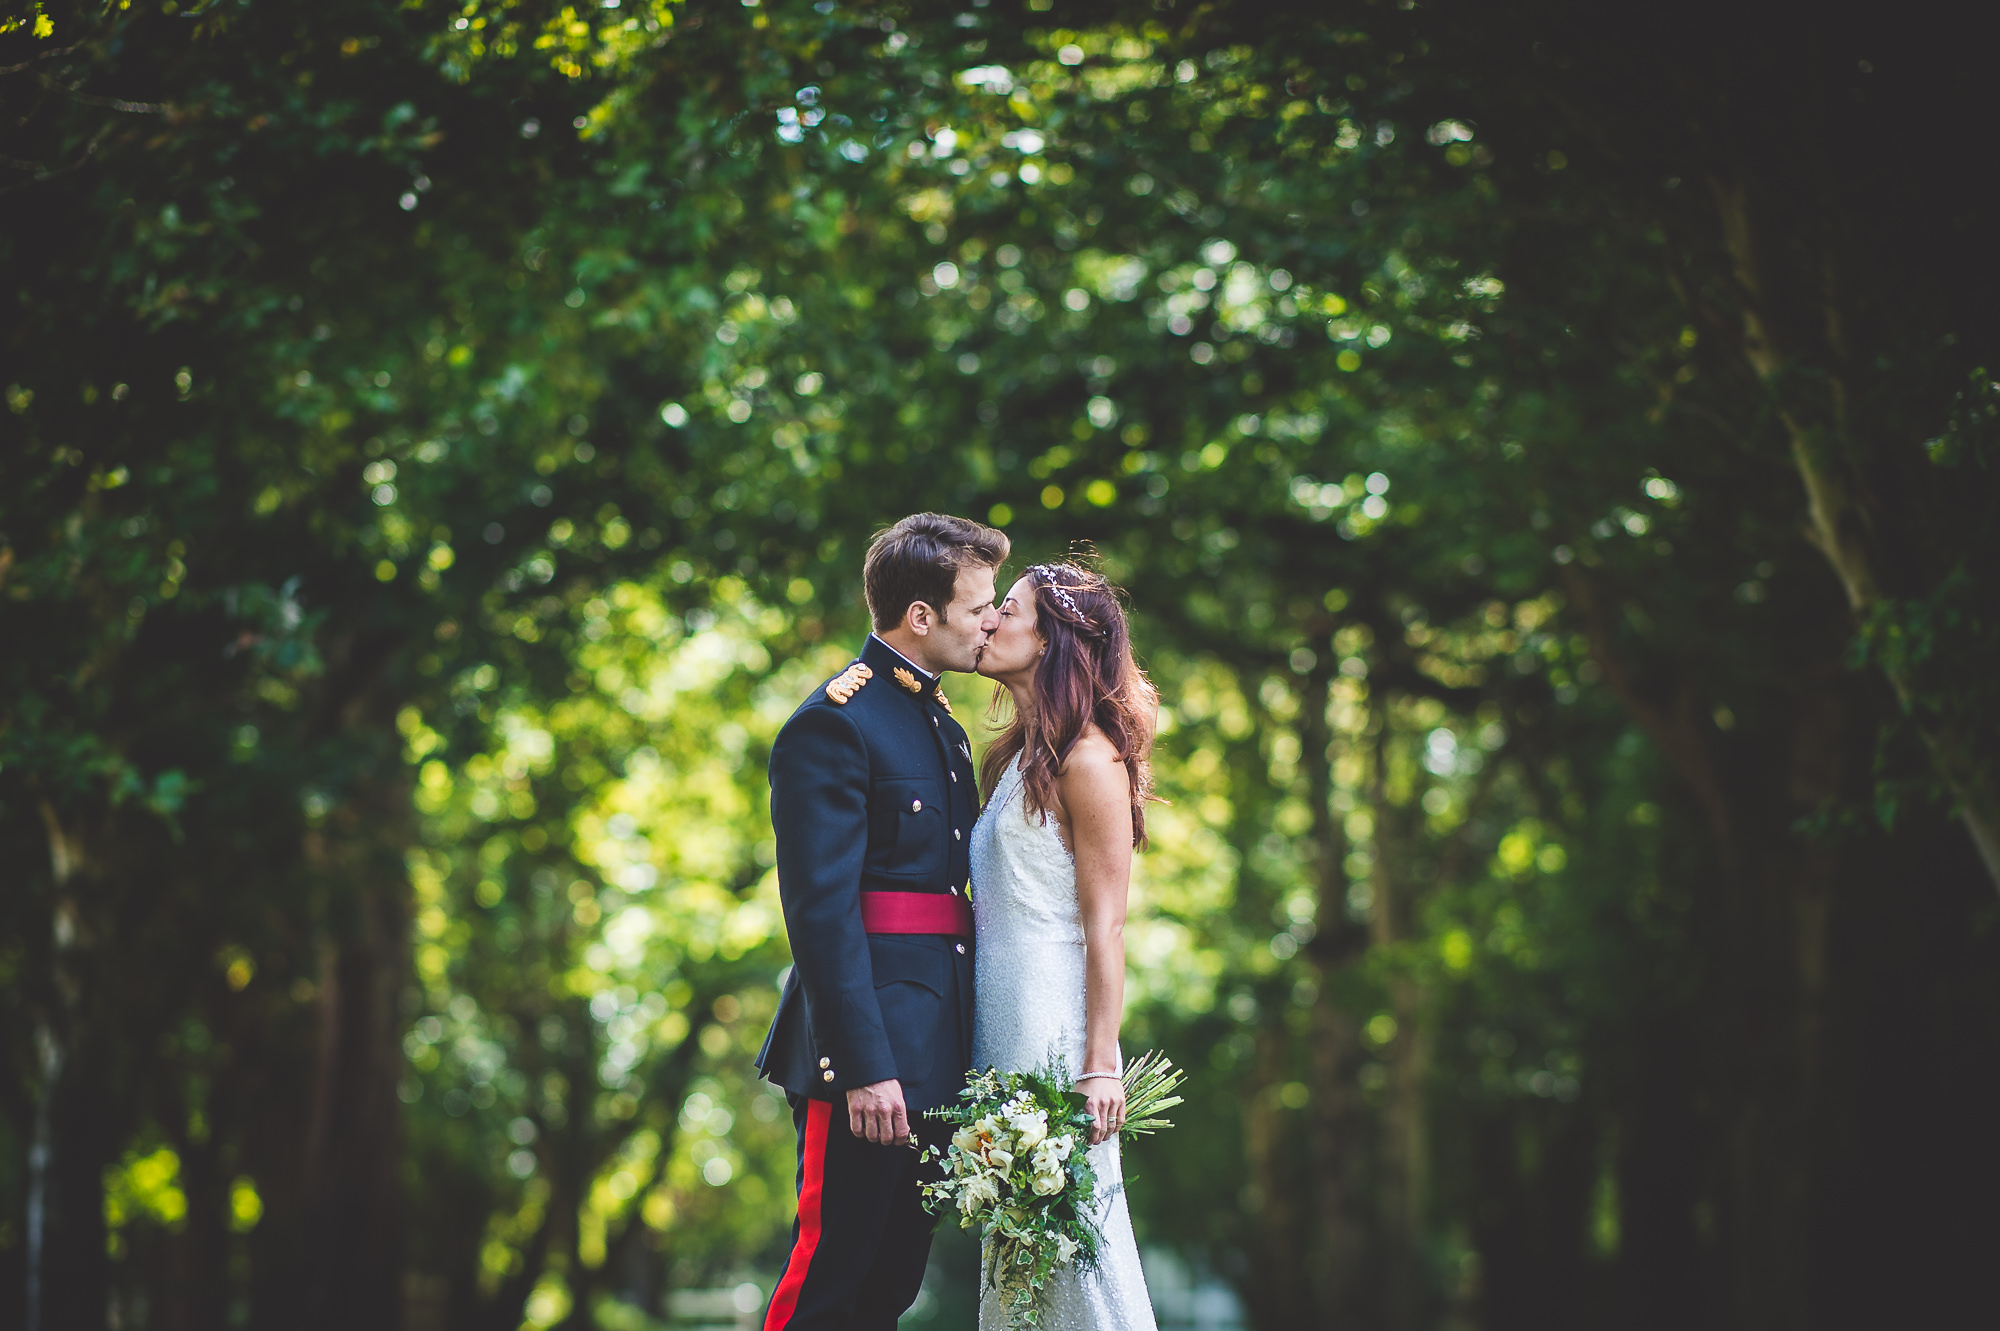 A wedding photo of a bride and groom sharing a romantic kiss surrounded by nature.